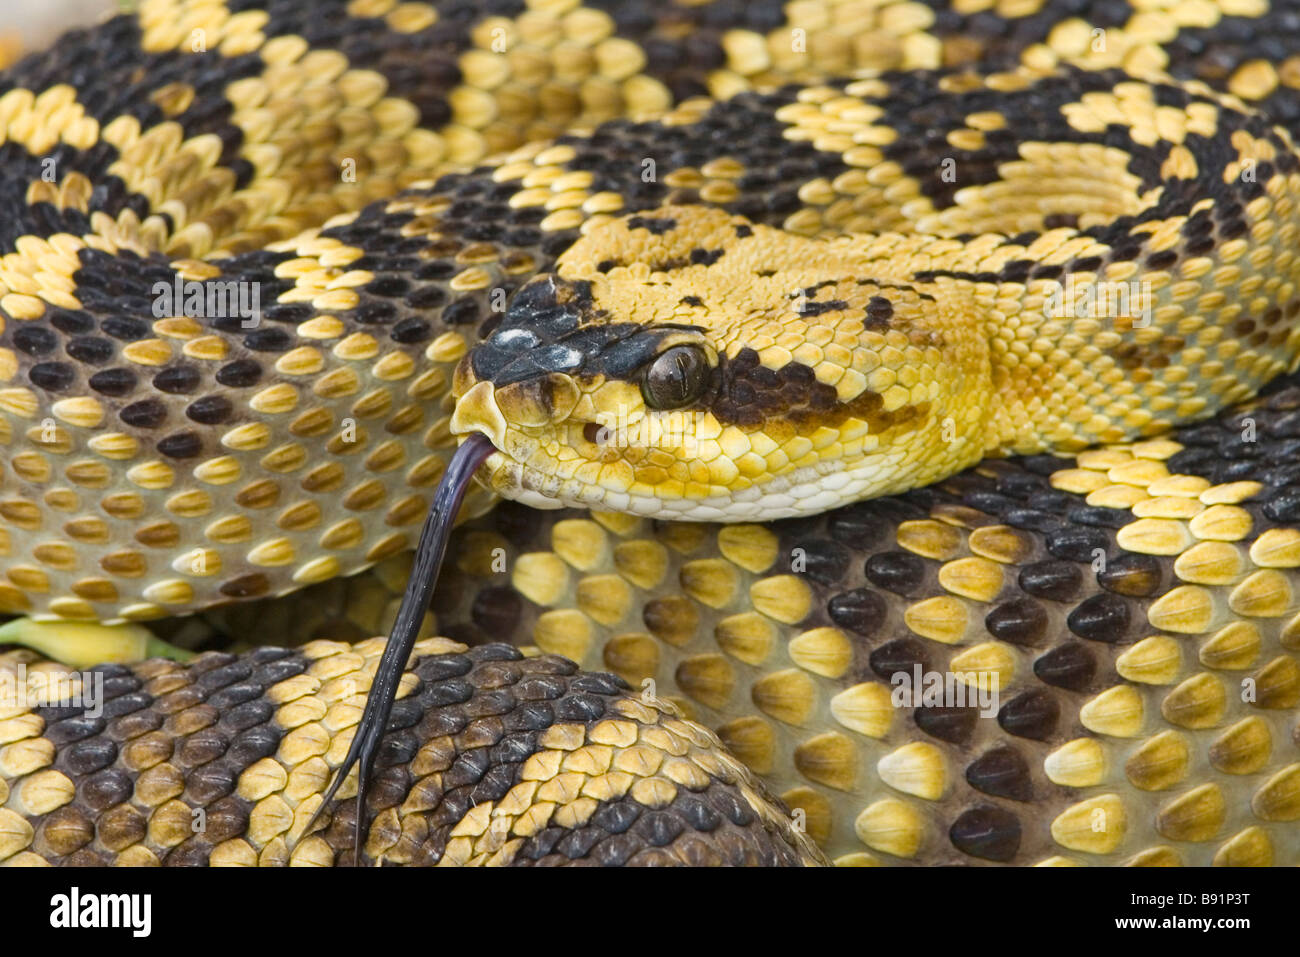 Black-tailed Rattlesnake - closeup of head showing vertical pupils and pit of the venomous pitvipers. Stock Photo